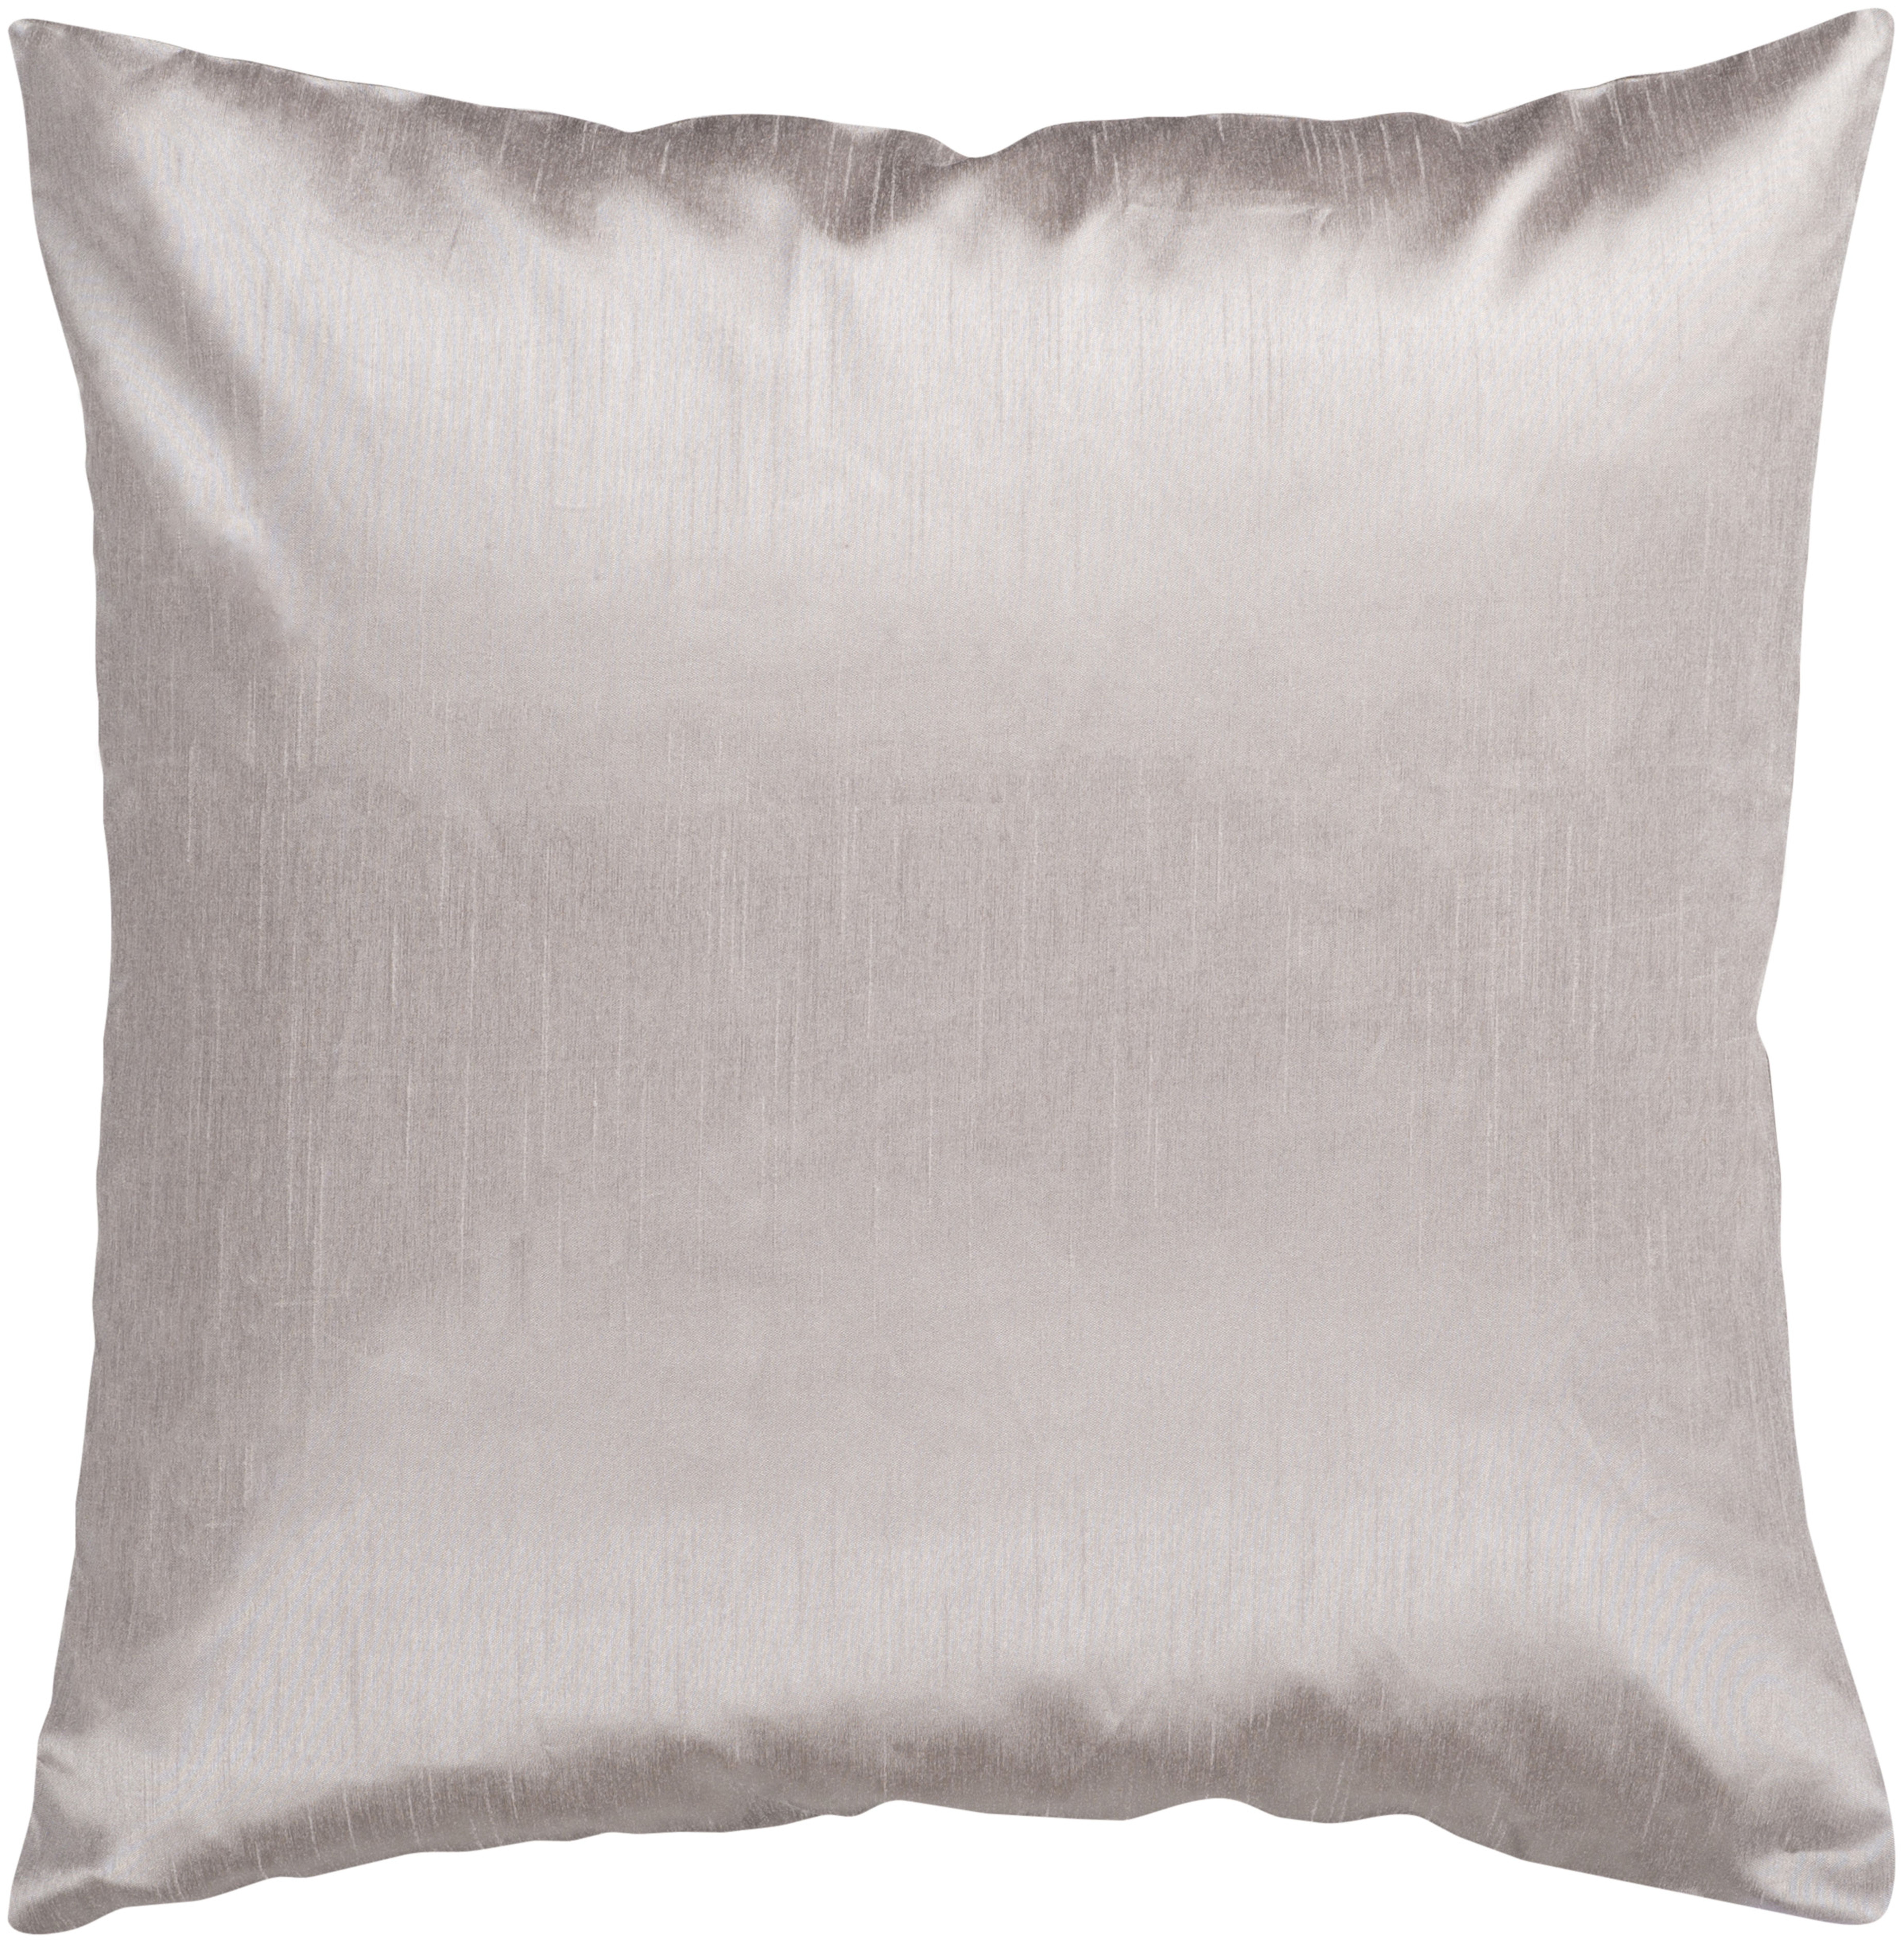 Solid Luxe Throw Pillow, 22" x 22", with down insert - Surya